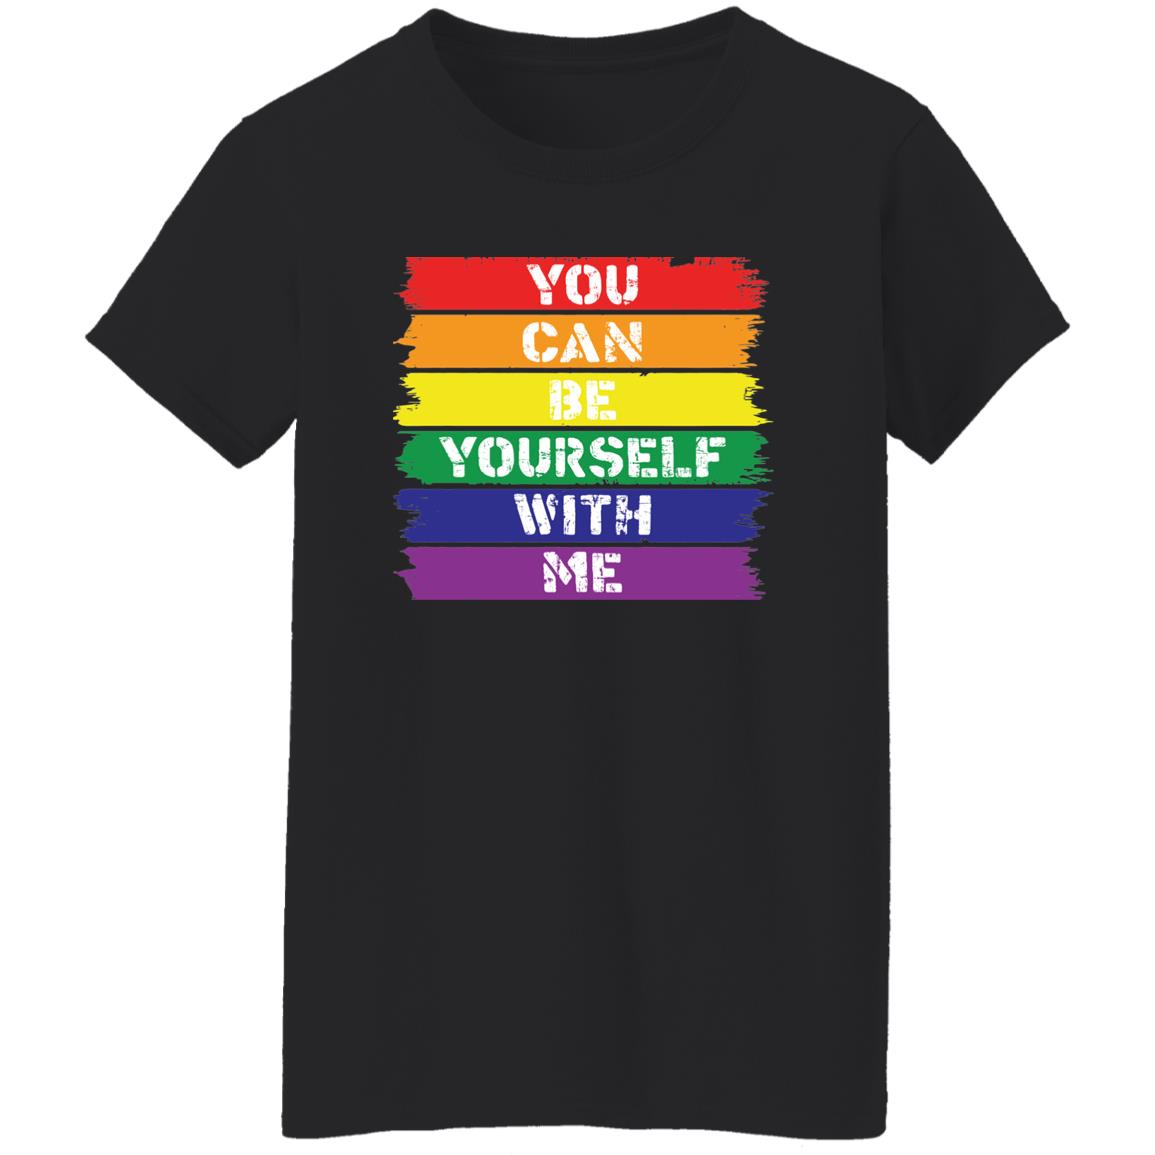 You can be yourself with me T shirt & Hoodie